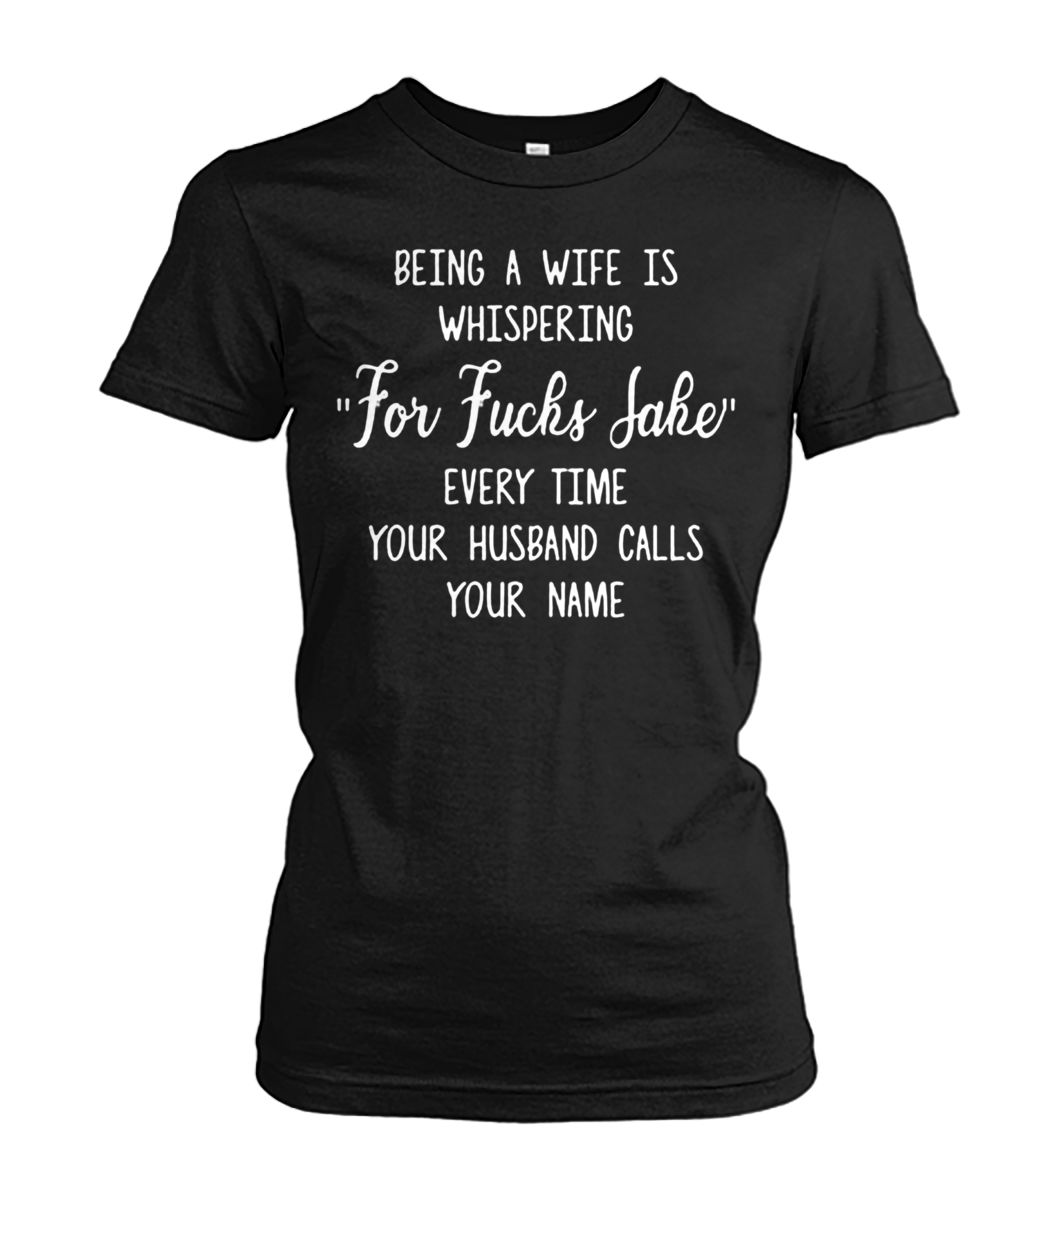 Being a wife is whispering for fuck sake women's crew tee